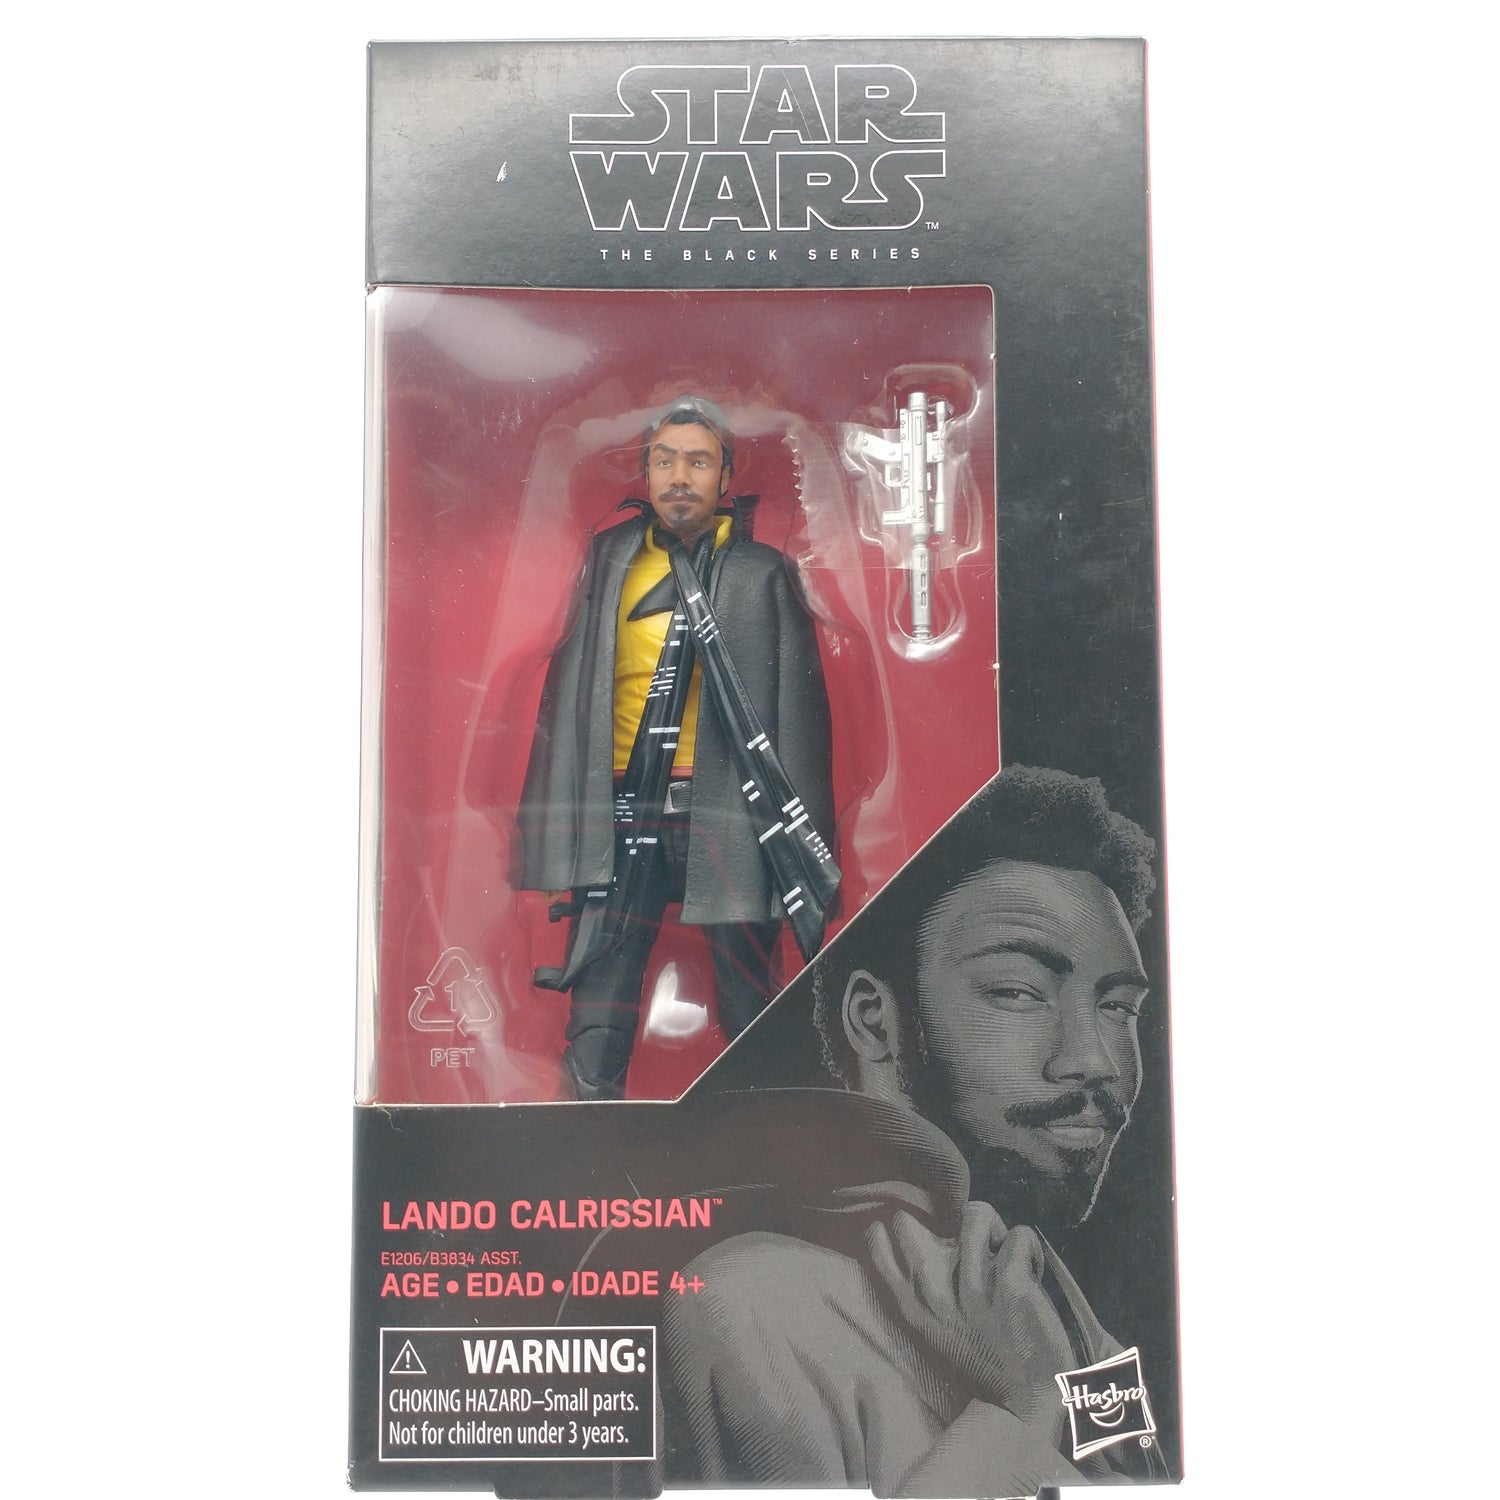 The front of the box and bubble are intact. The action figure inside the box is dark skinned with black hair. He is wearing a black shoulder cape and a yellow shirt. Next to him in the bubble is a white gun